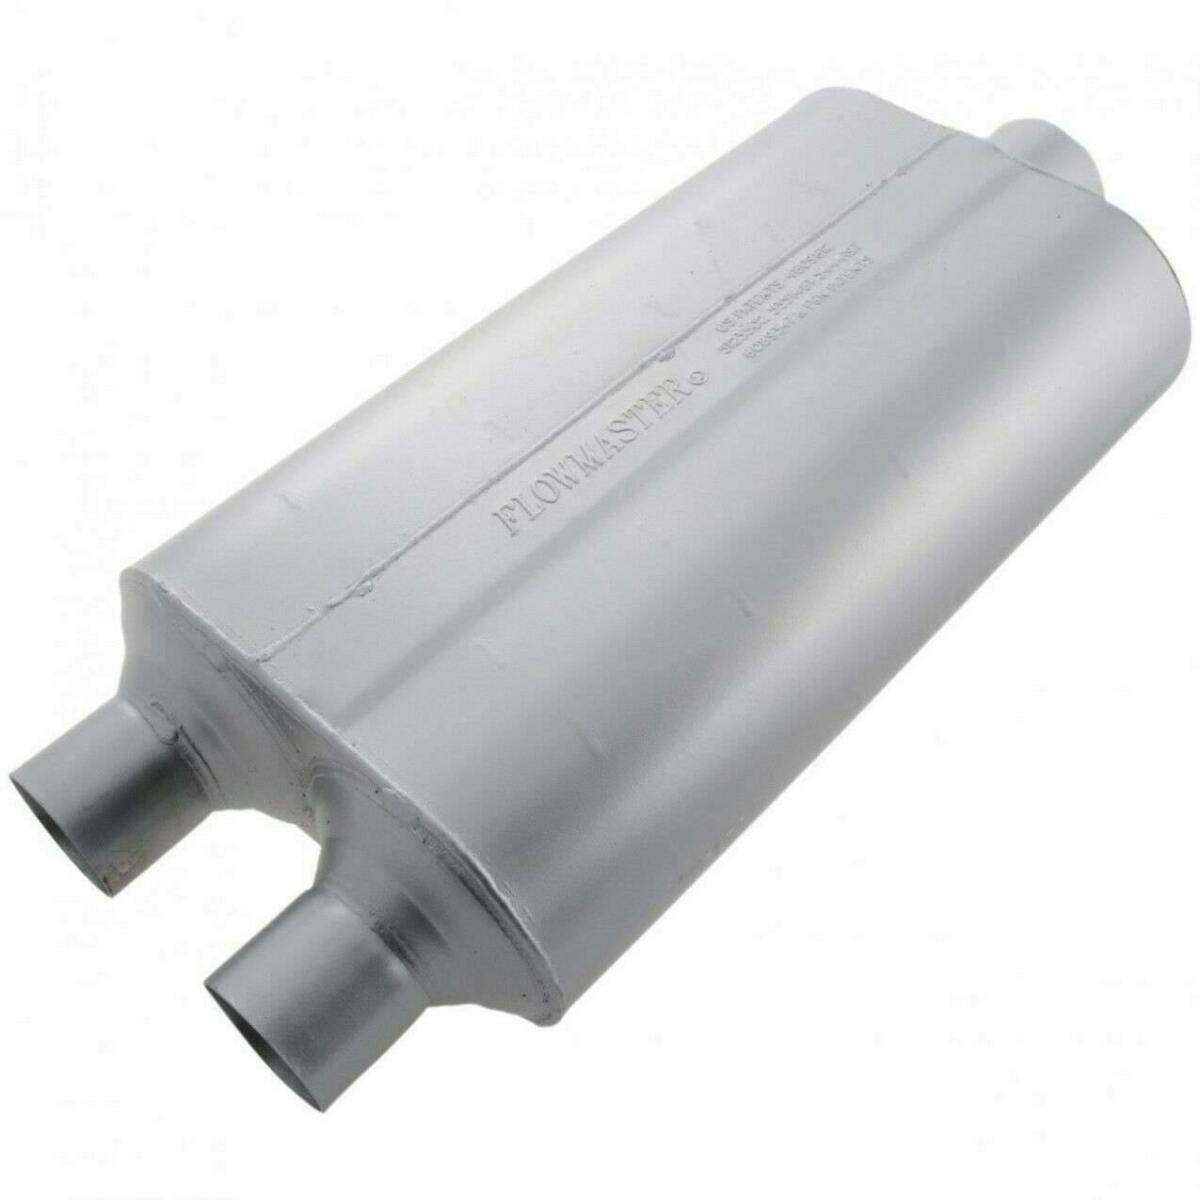 Flowmaster Super 50 Muffler 2.25 Dual In / 3.00 Center Out 8524553